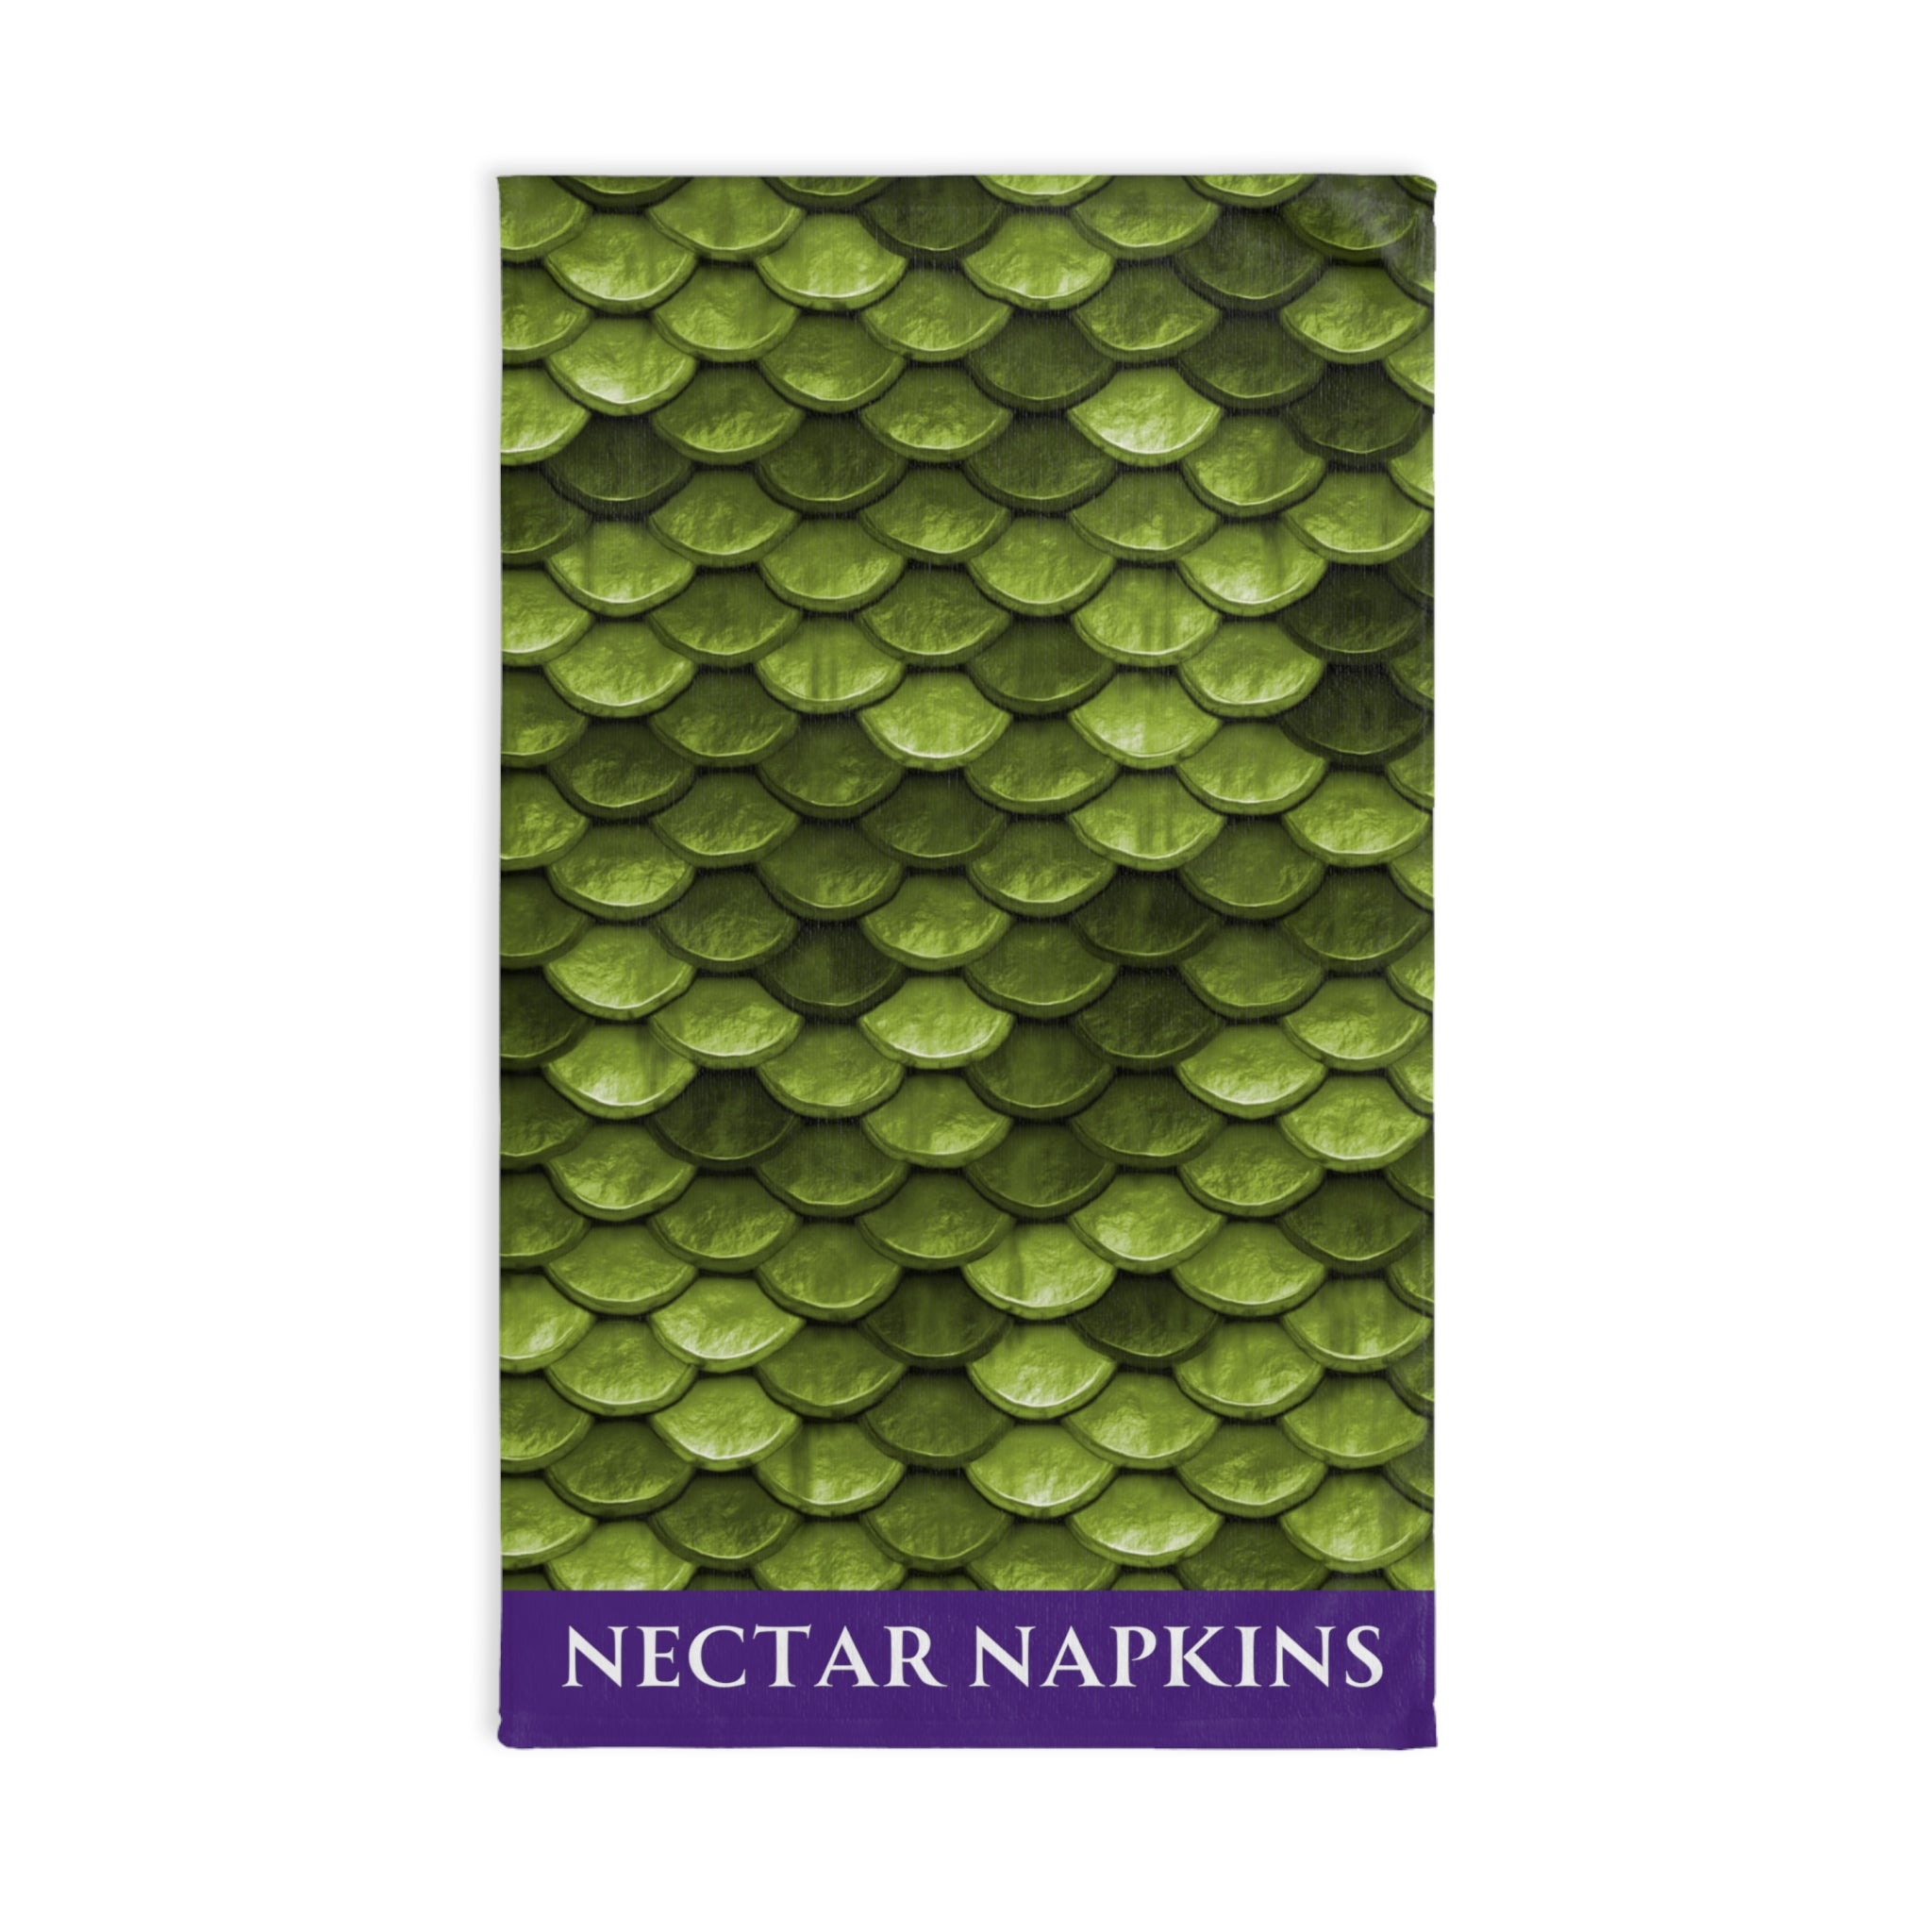 Mermaid Tail Green Purple | Funny Gifts for Men - Gifts for Him - Birthday Gifts for Men, Him, Husband, Boyfriend, New Couple Gifts, Fathers & Valentines Day Gifts, Christmas Gifts NECTAR NAPKINS